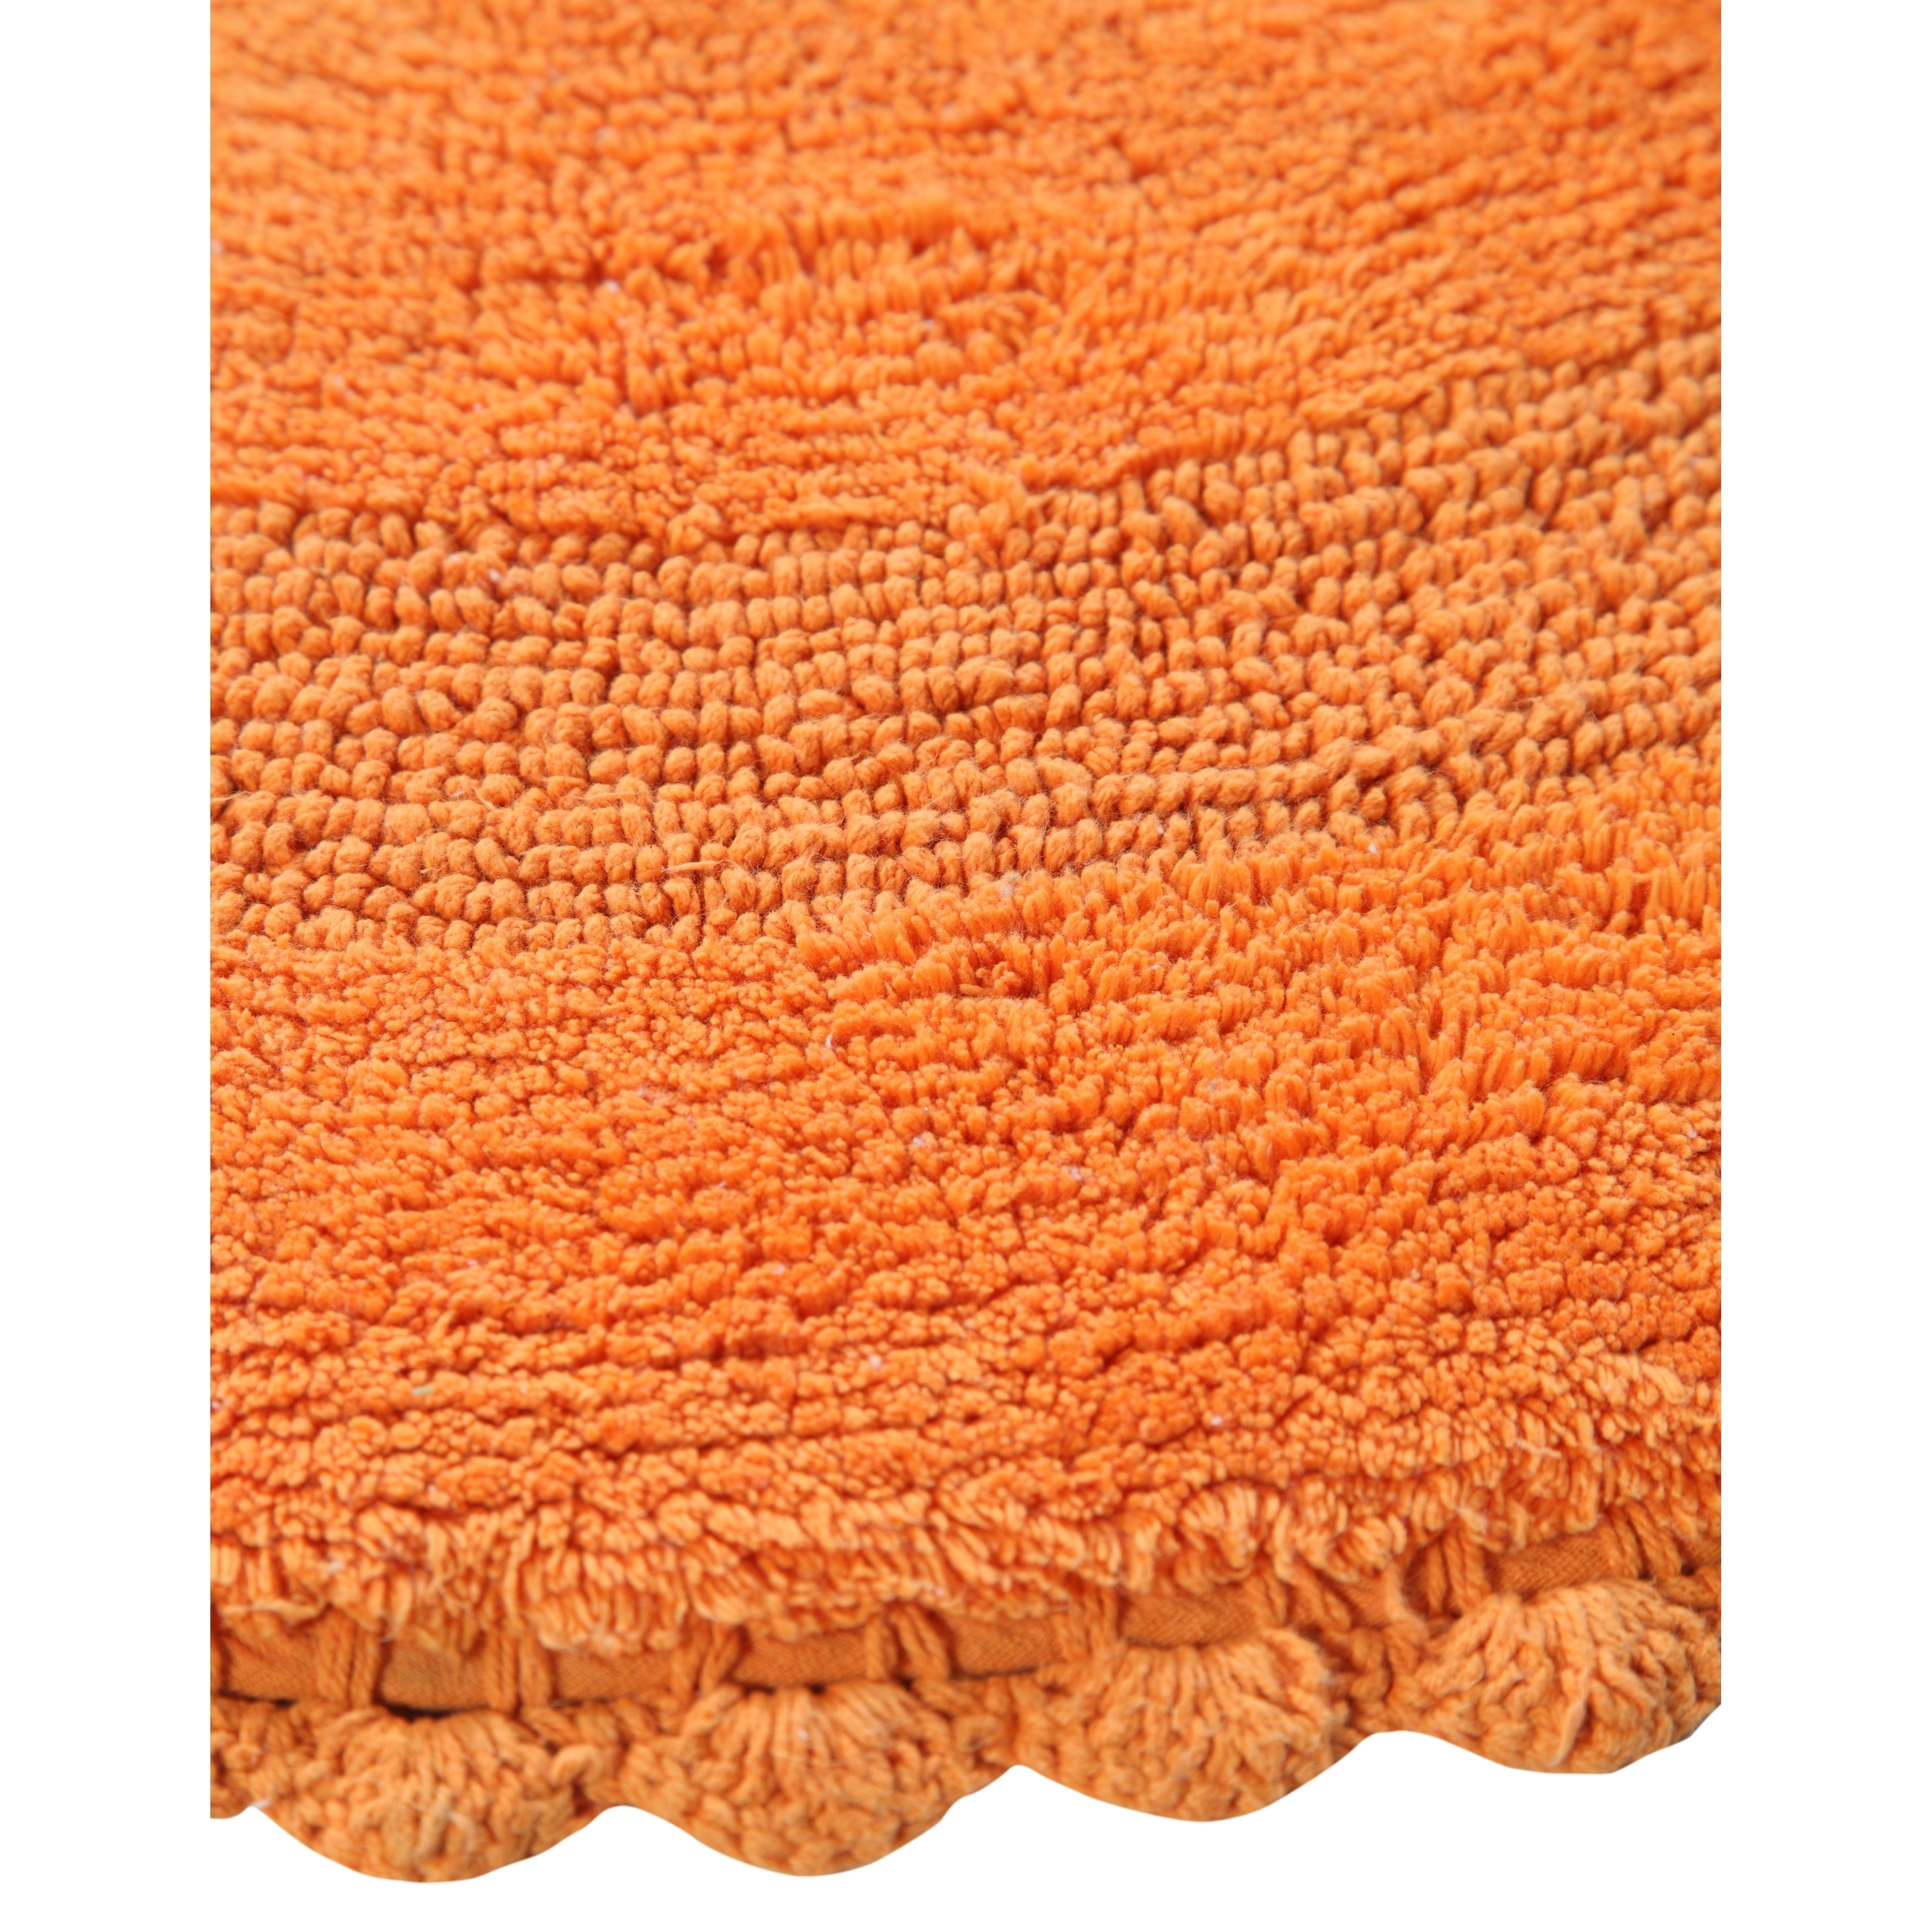 Cotton Reversible Hand Knitted Crochet Lace bath Rug Details about   36 Inch Round Orange 